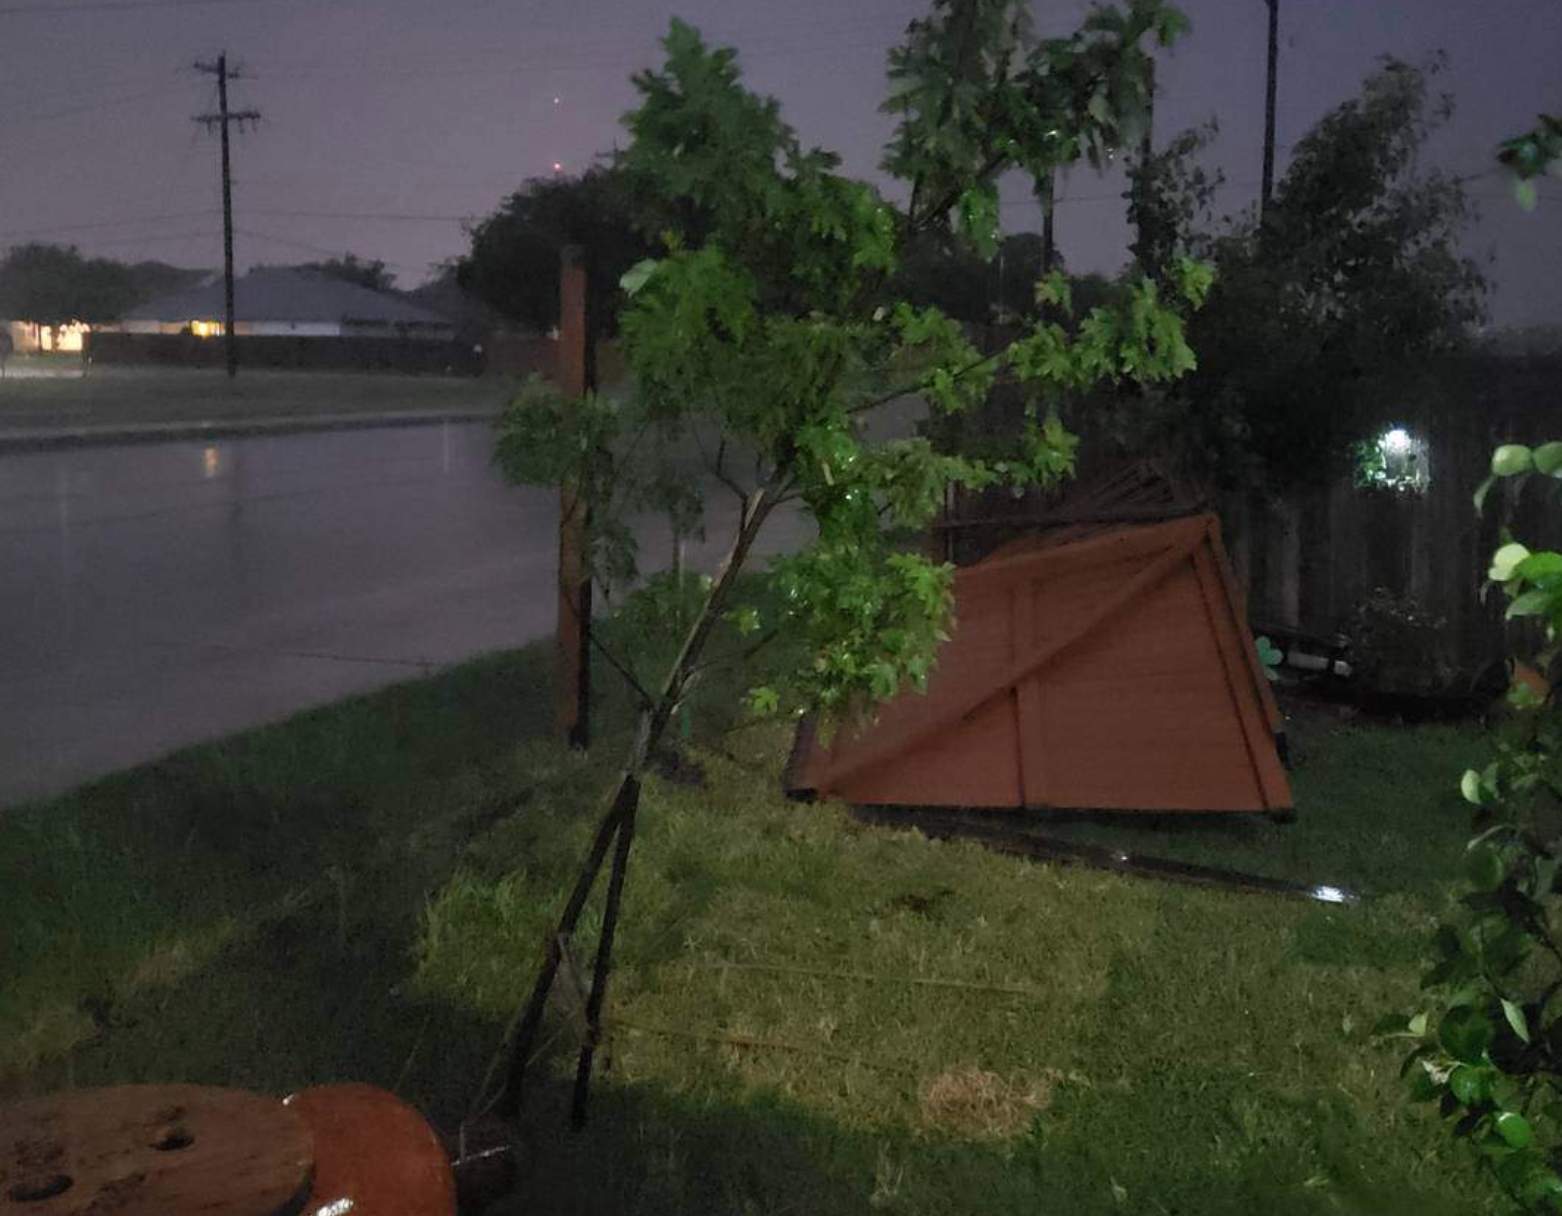 Was Sunday night’s storm damage from straight-line winds or a tornado?